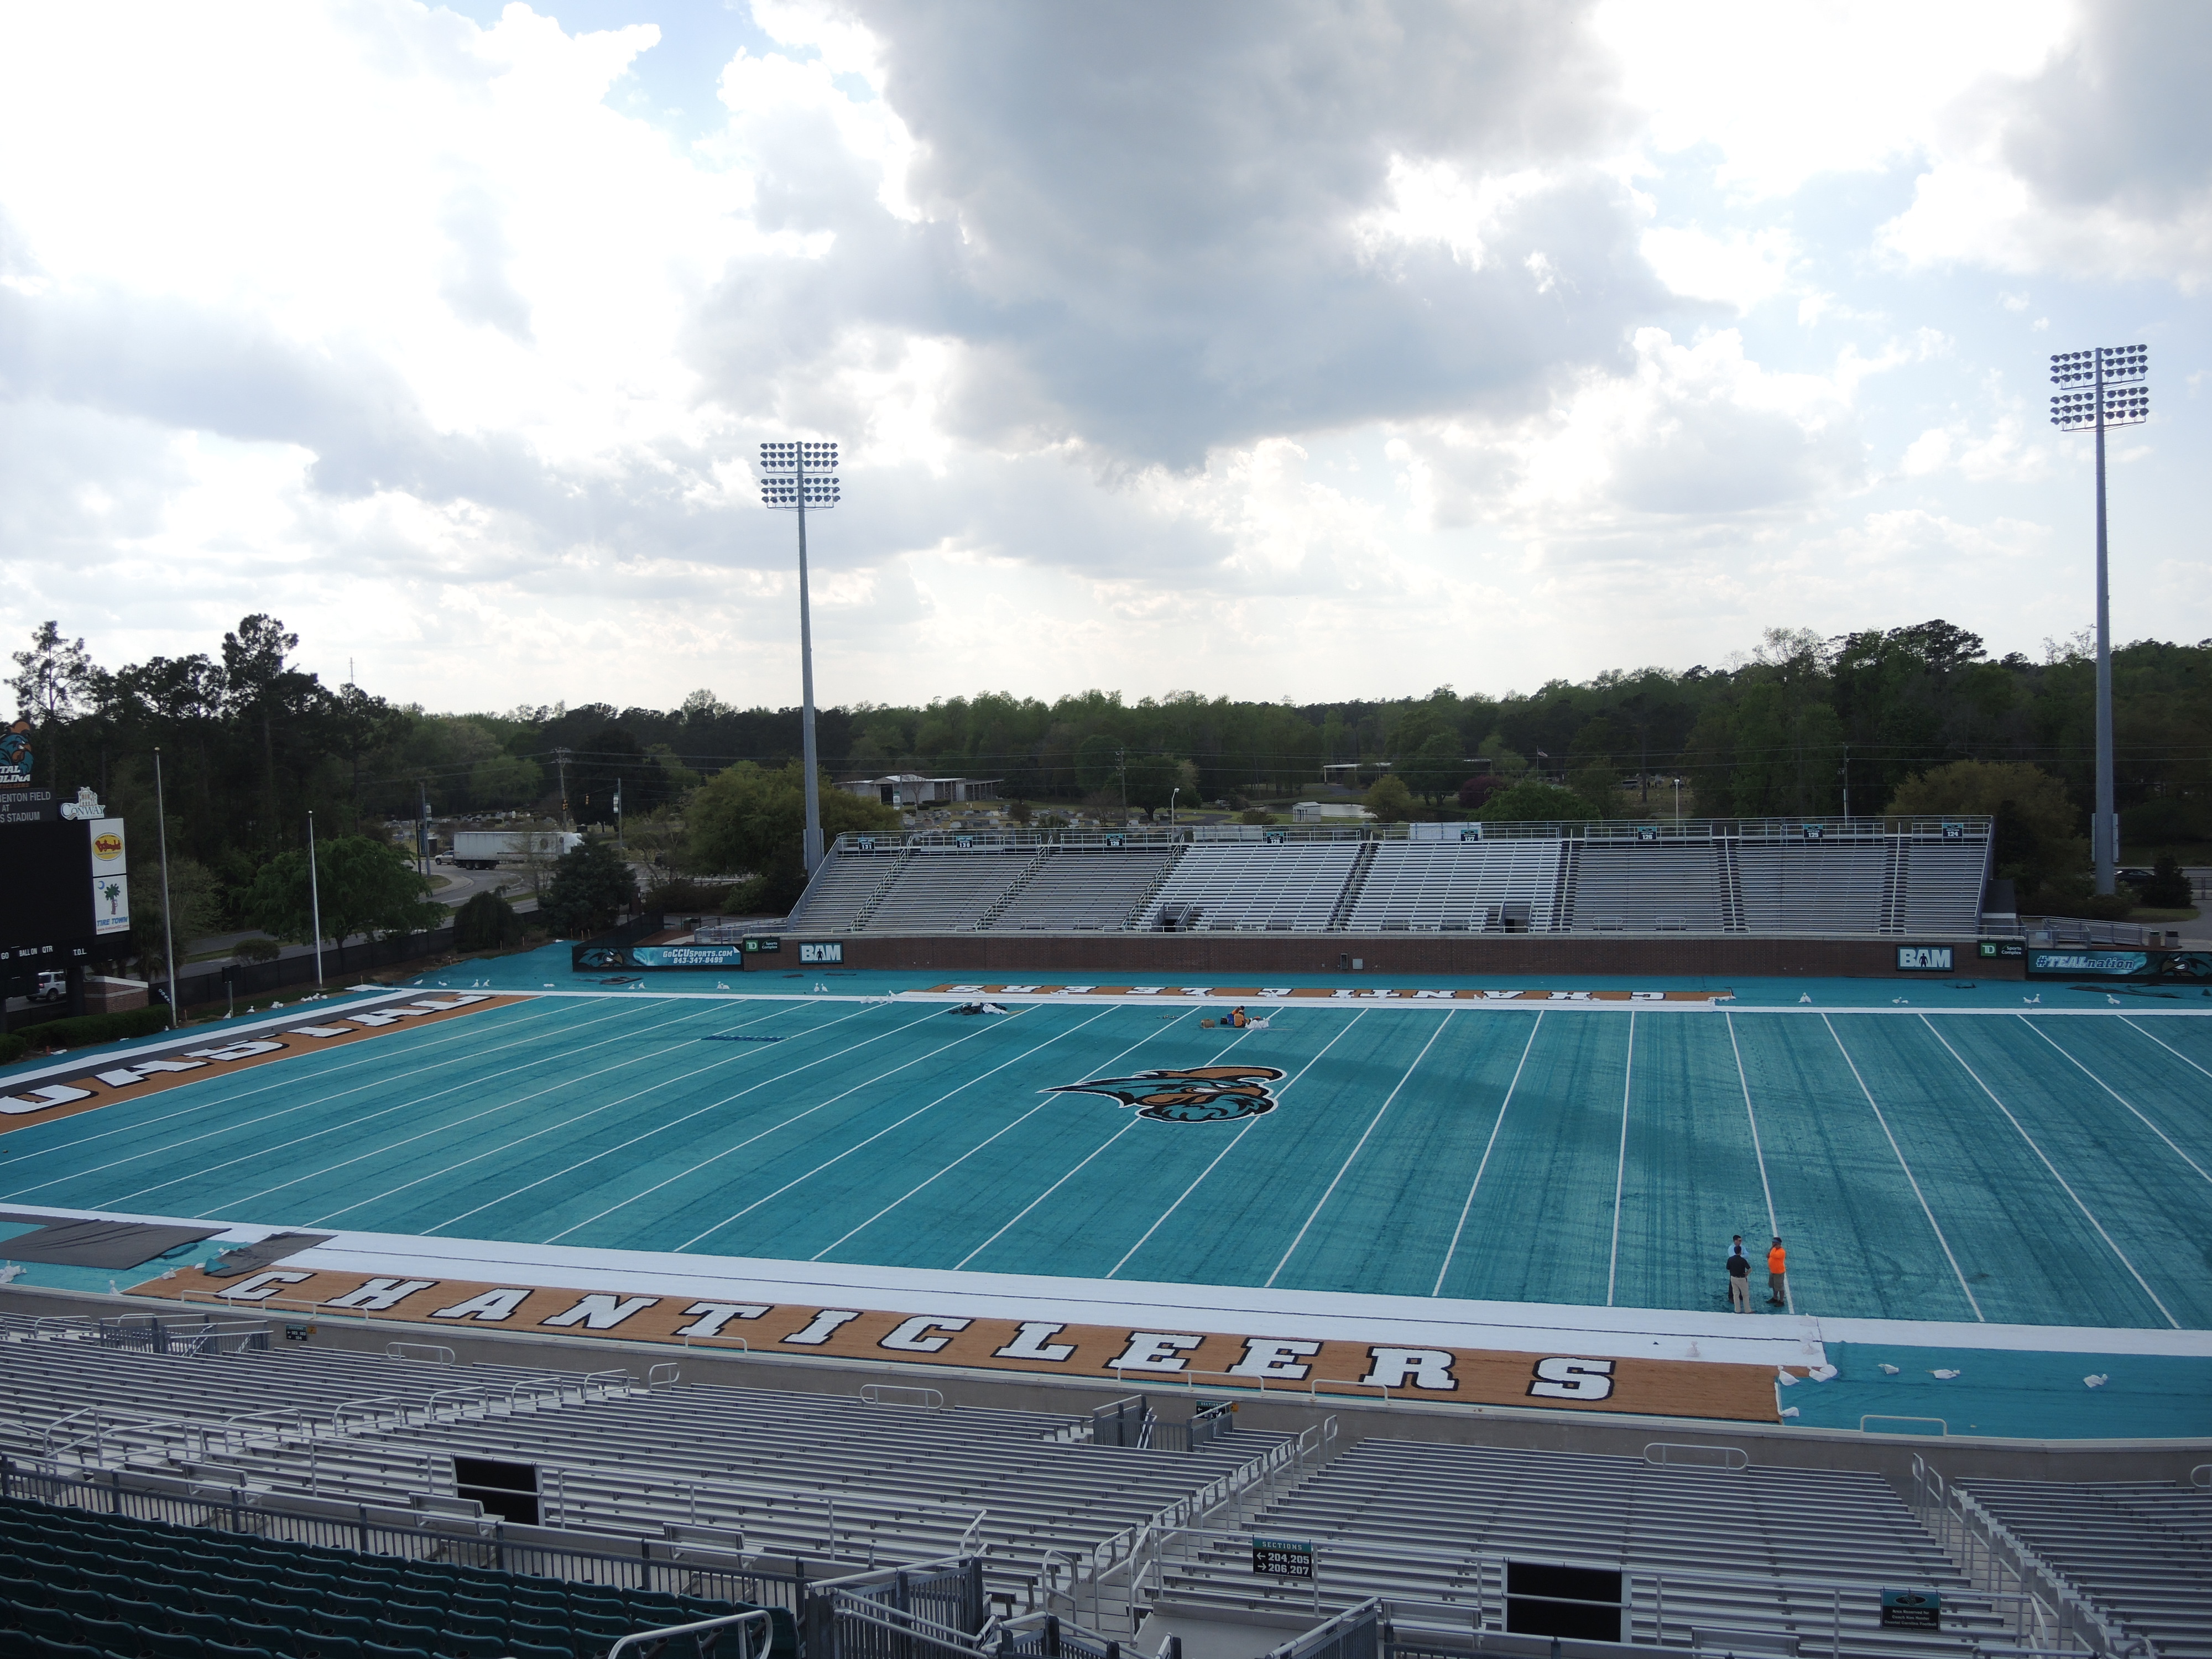 I present to you the teal turf at Brooks Stadium.